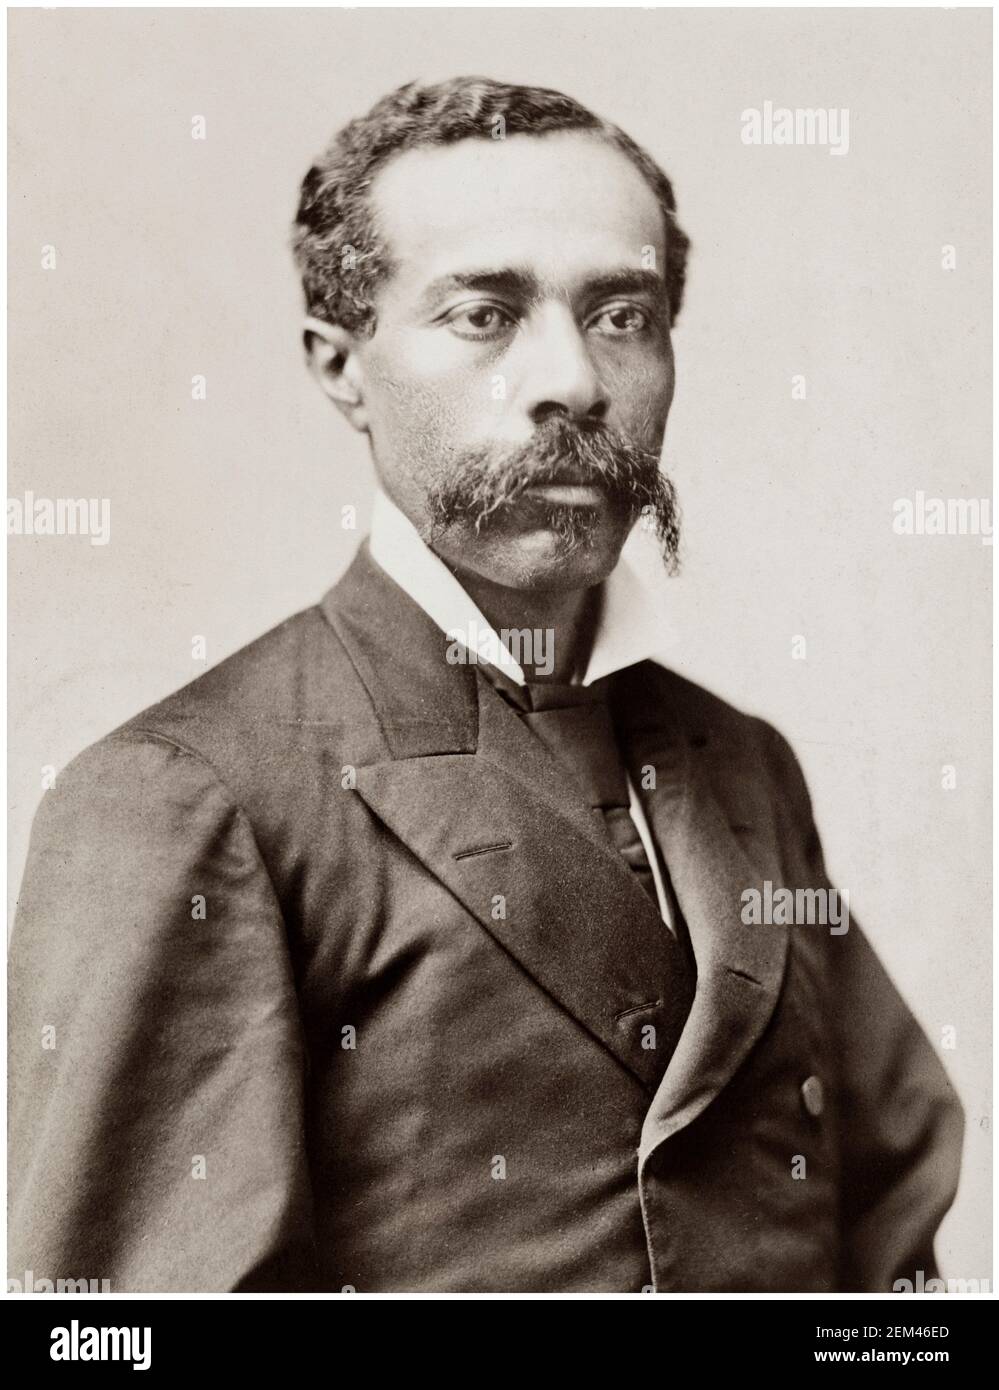 John Roy Lynch (1847-1939), Republican politician, writer, attorney and military officer, portrait photograph by Charles Milton Bell, circa 1883 Stock Photo